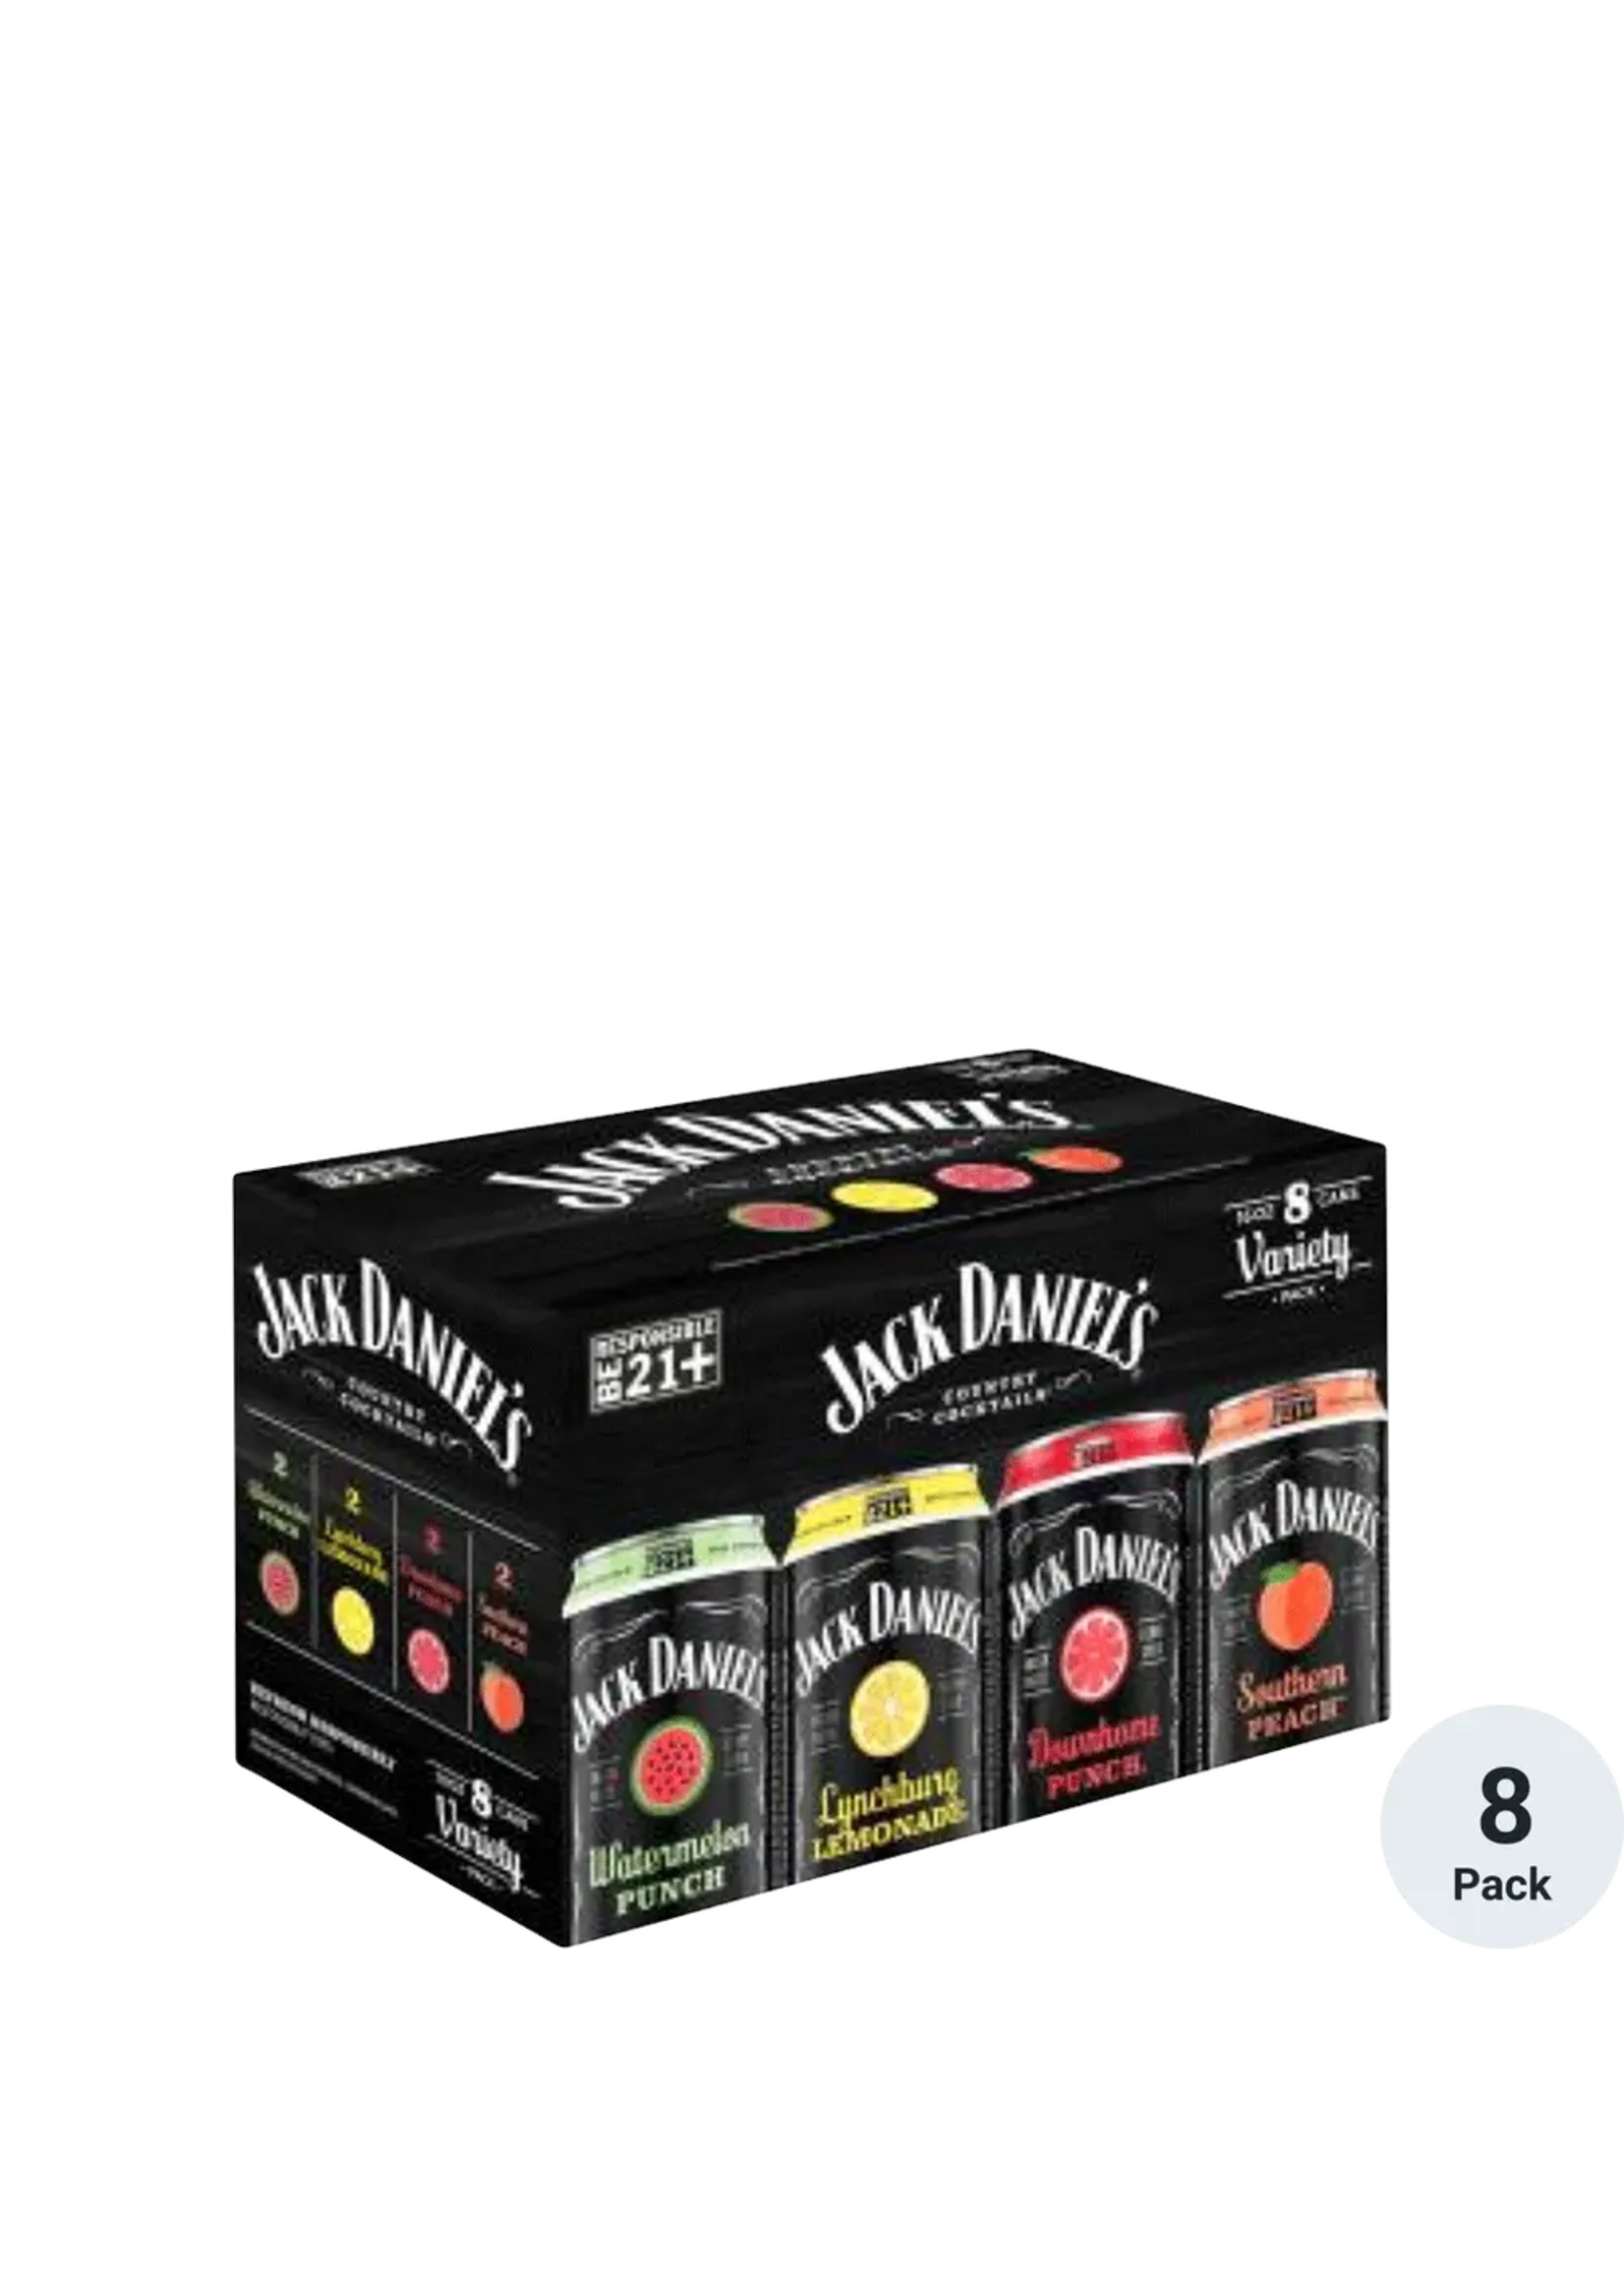 Jack Daniels Country Cocktails Variety Pack 8pk 16oz Cans